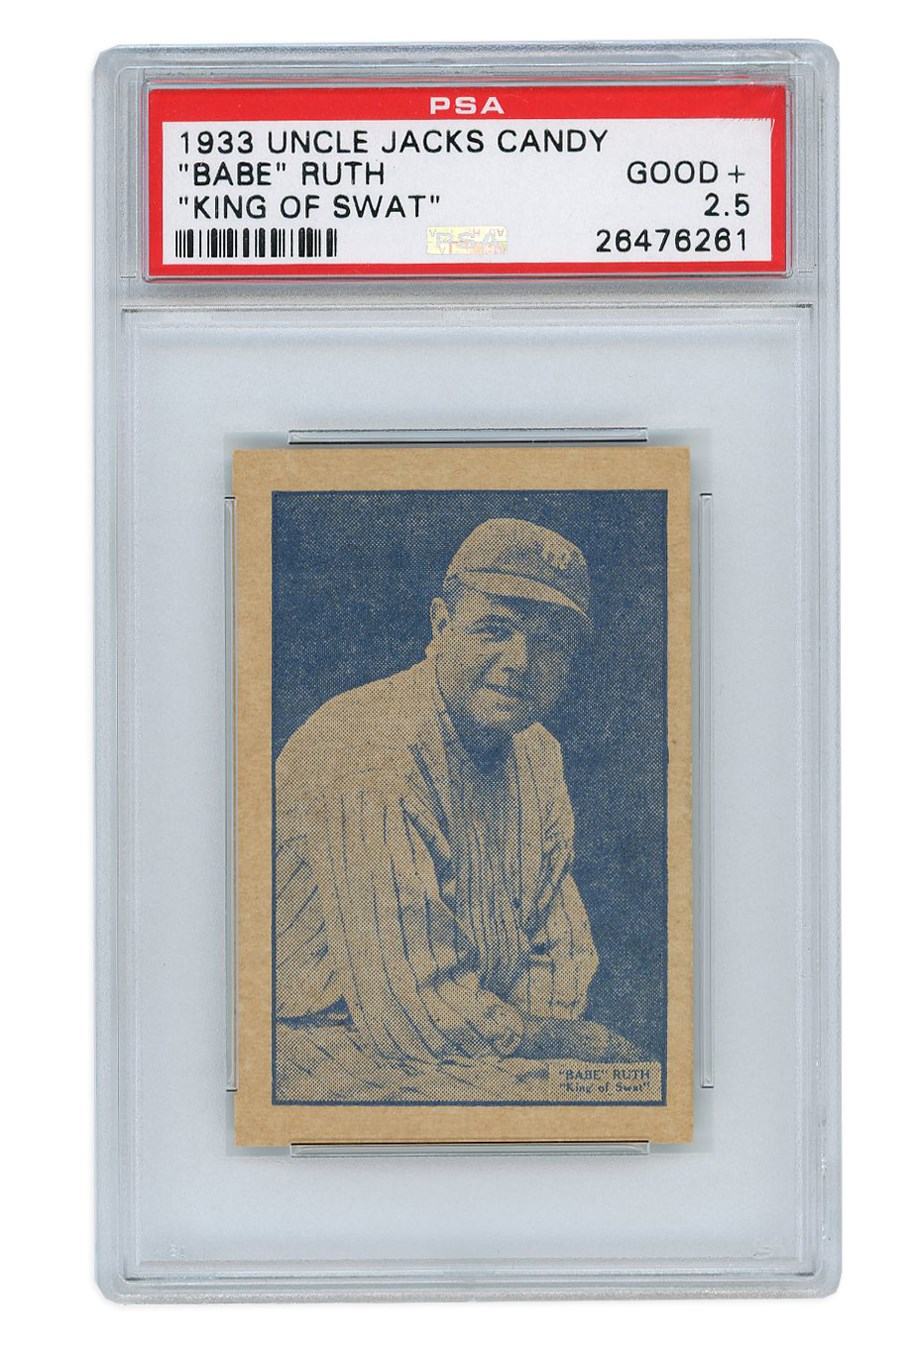 - Extremely Rare 1933 Uncle Jacks Candy Babe Ruth "King of Swat" PSA GOOD+ 2.5 - Highest Graded PSA Example!